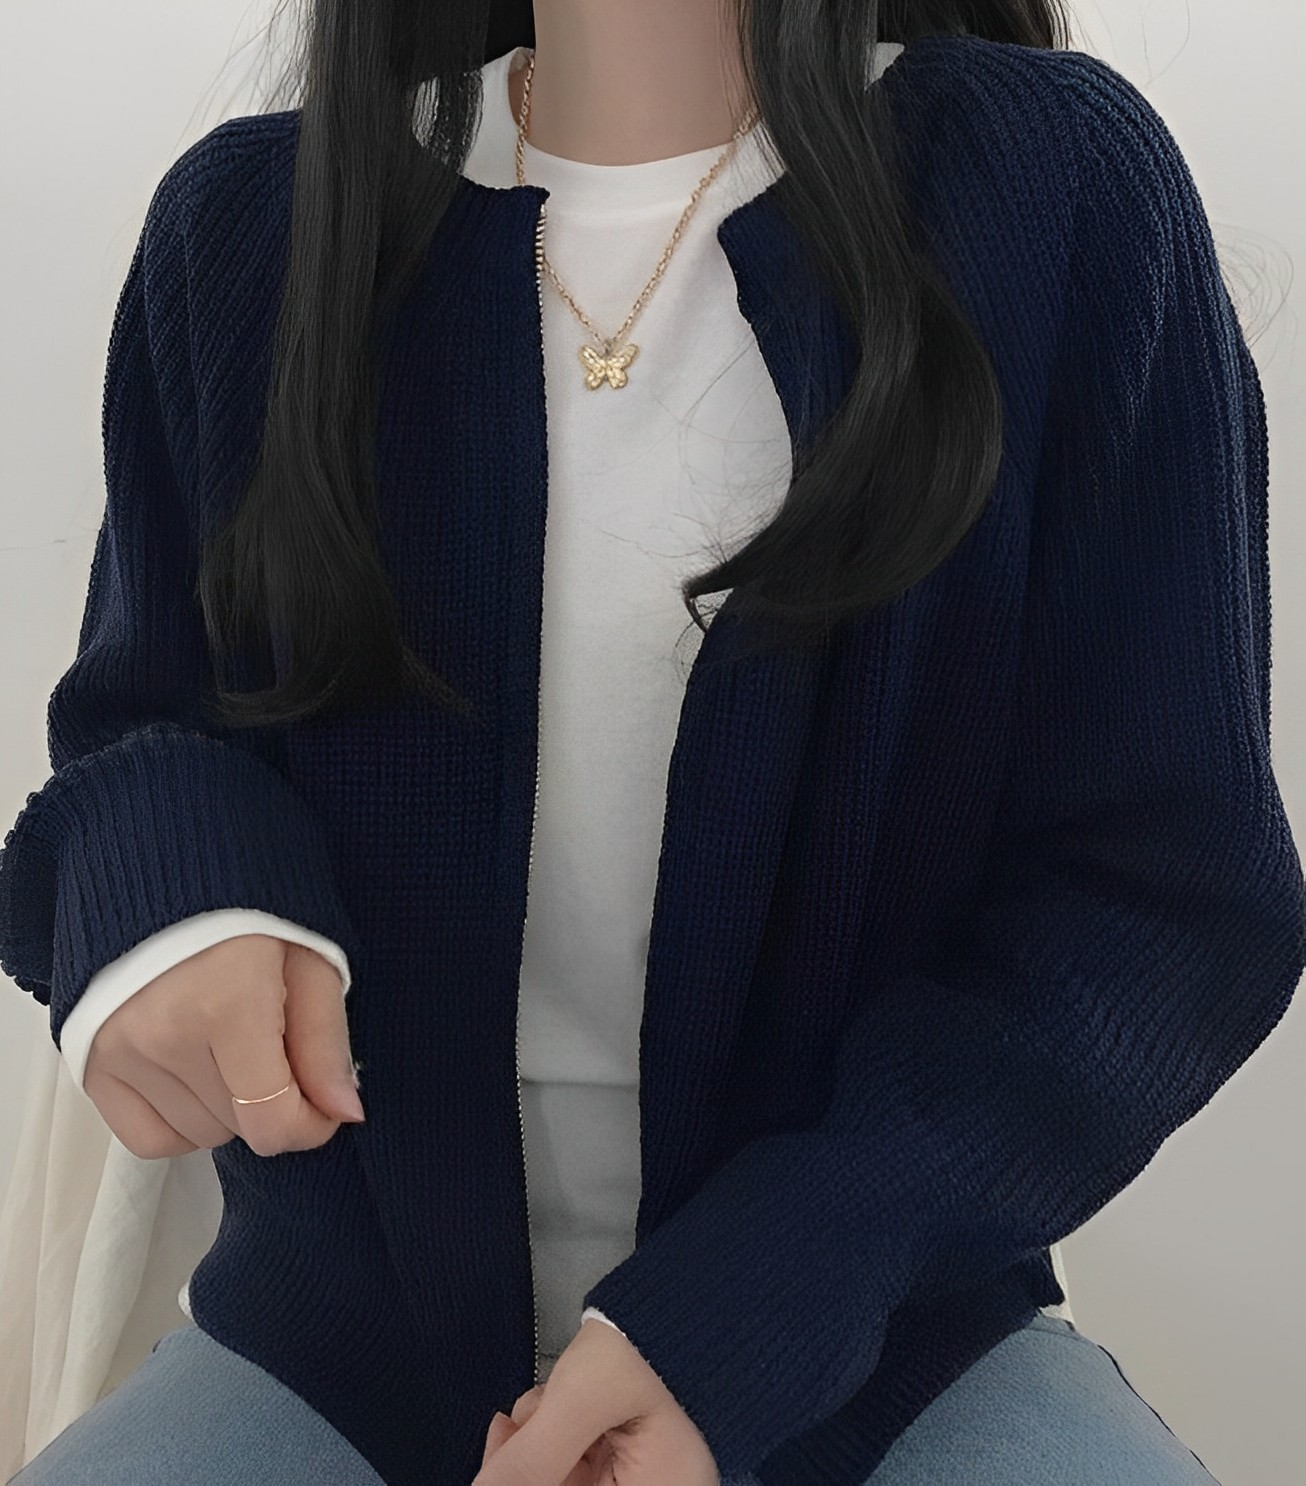 Jennie Blackpink Chain Outlined Cardigan